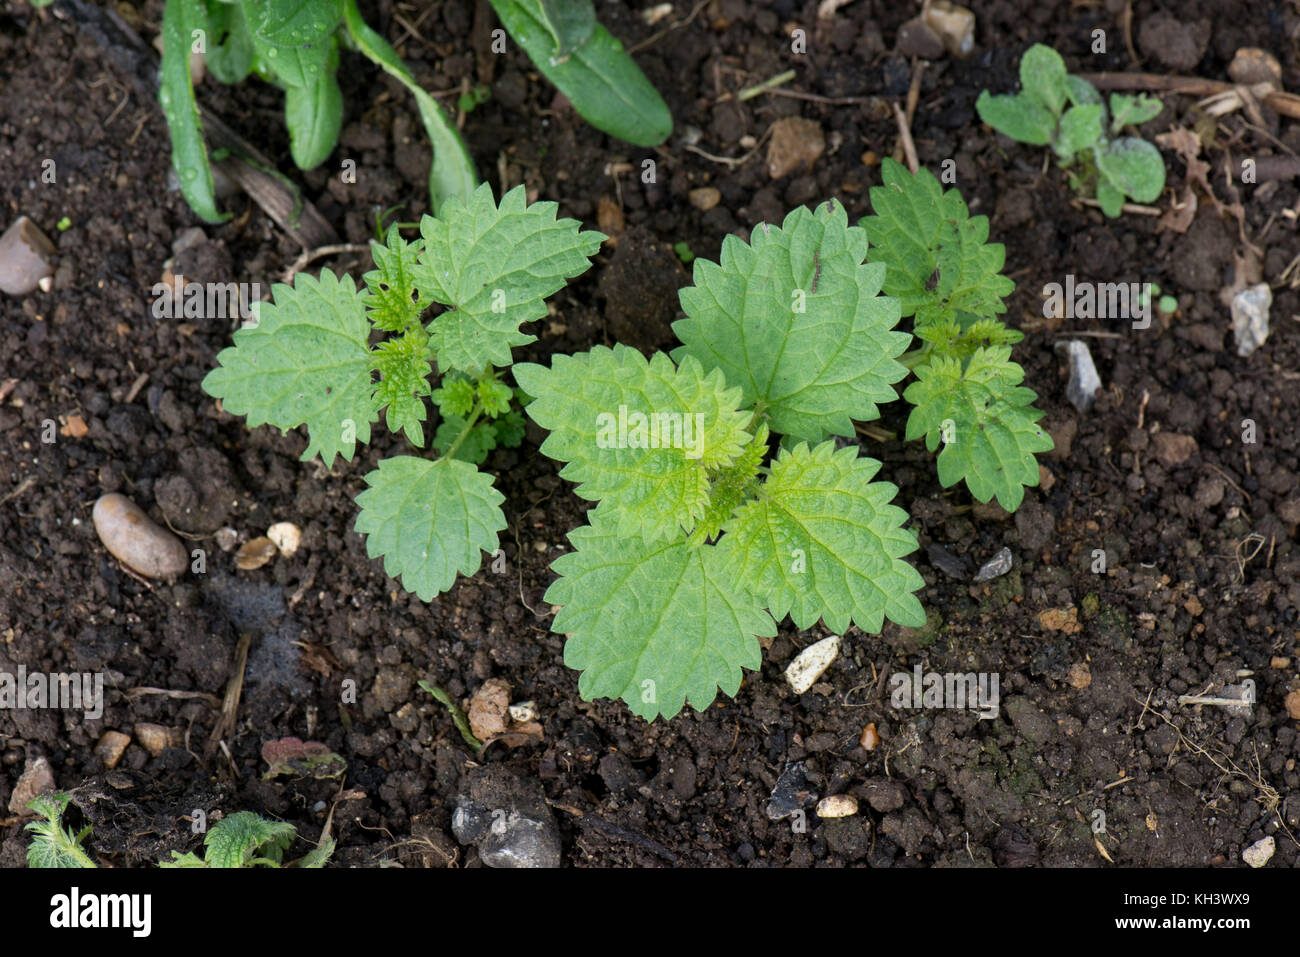 Young stinging nettle, Urtica dioica, shoots arising from a fragmented rhizome root in a flower bed, September Stock Photo